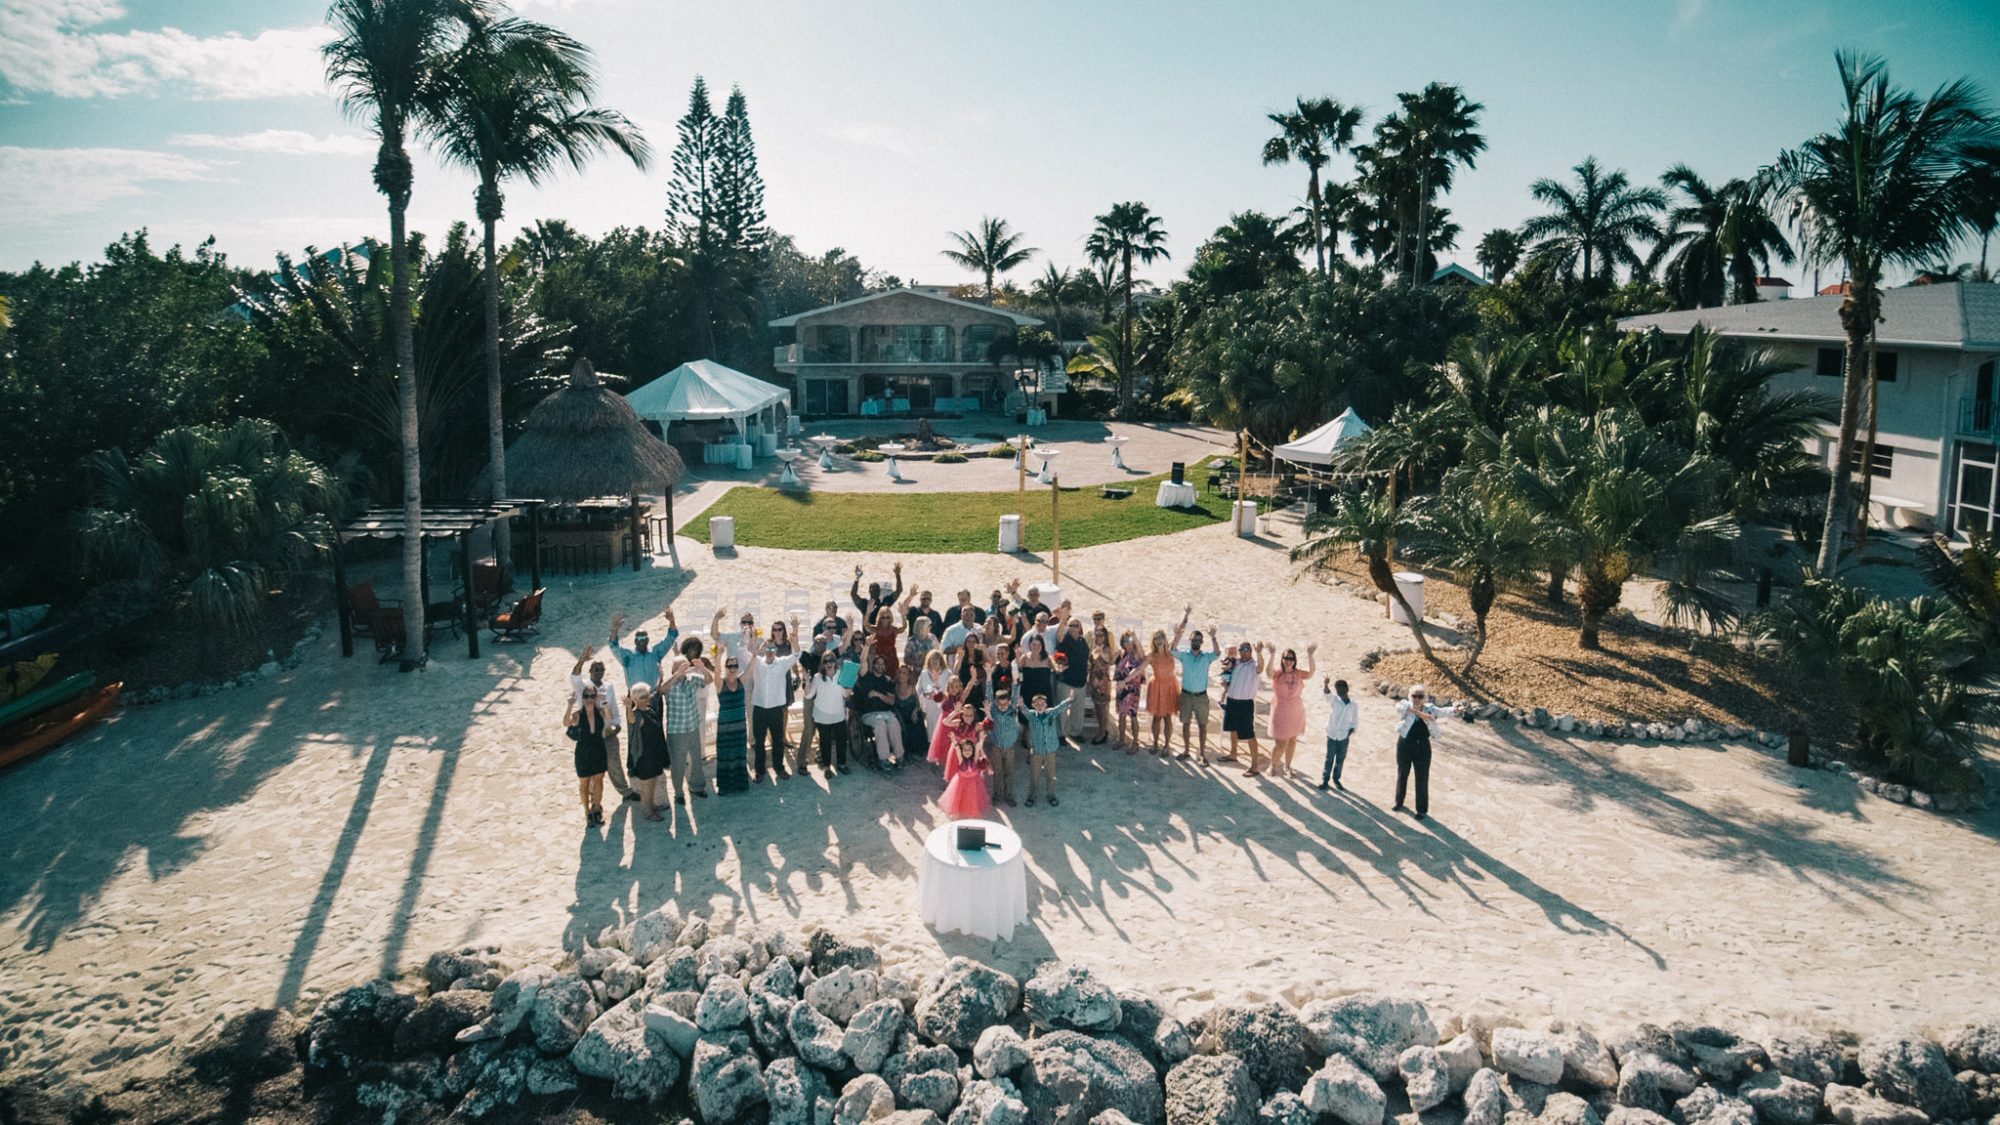 A group of people posing for a photo during a destination wedding in the Florida Keys on the beach.